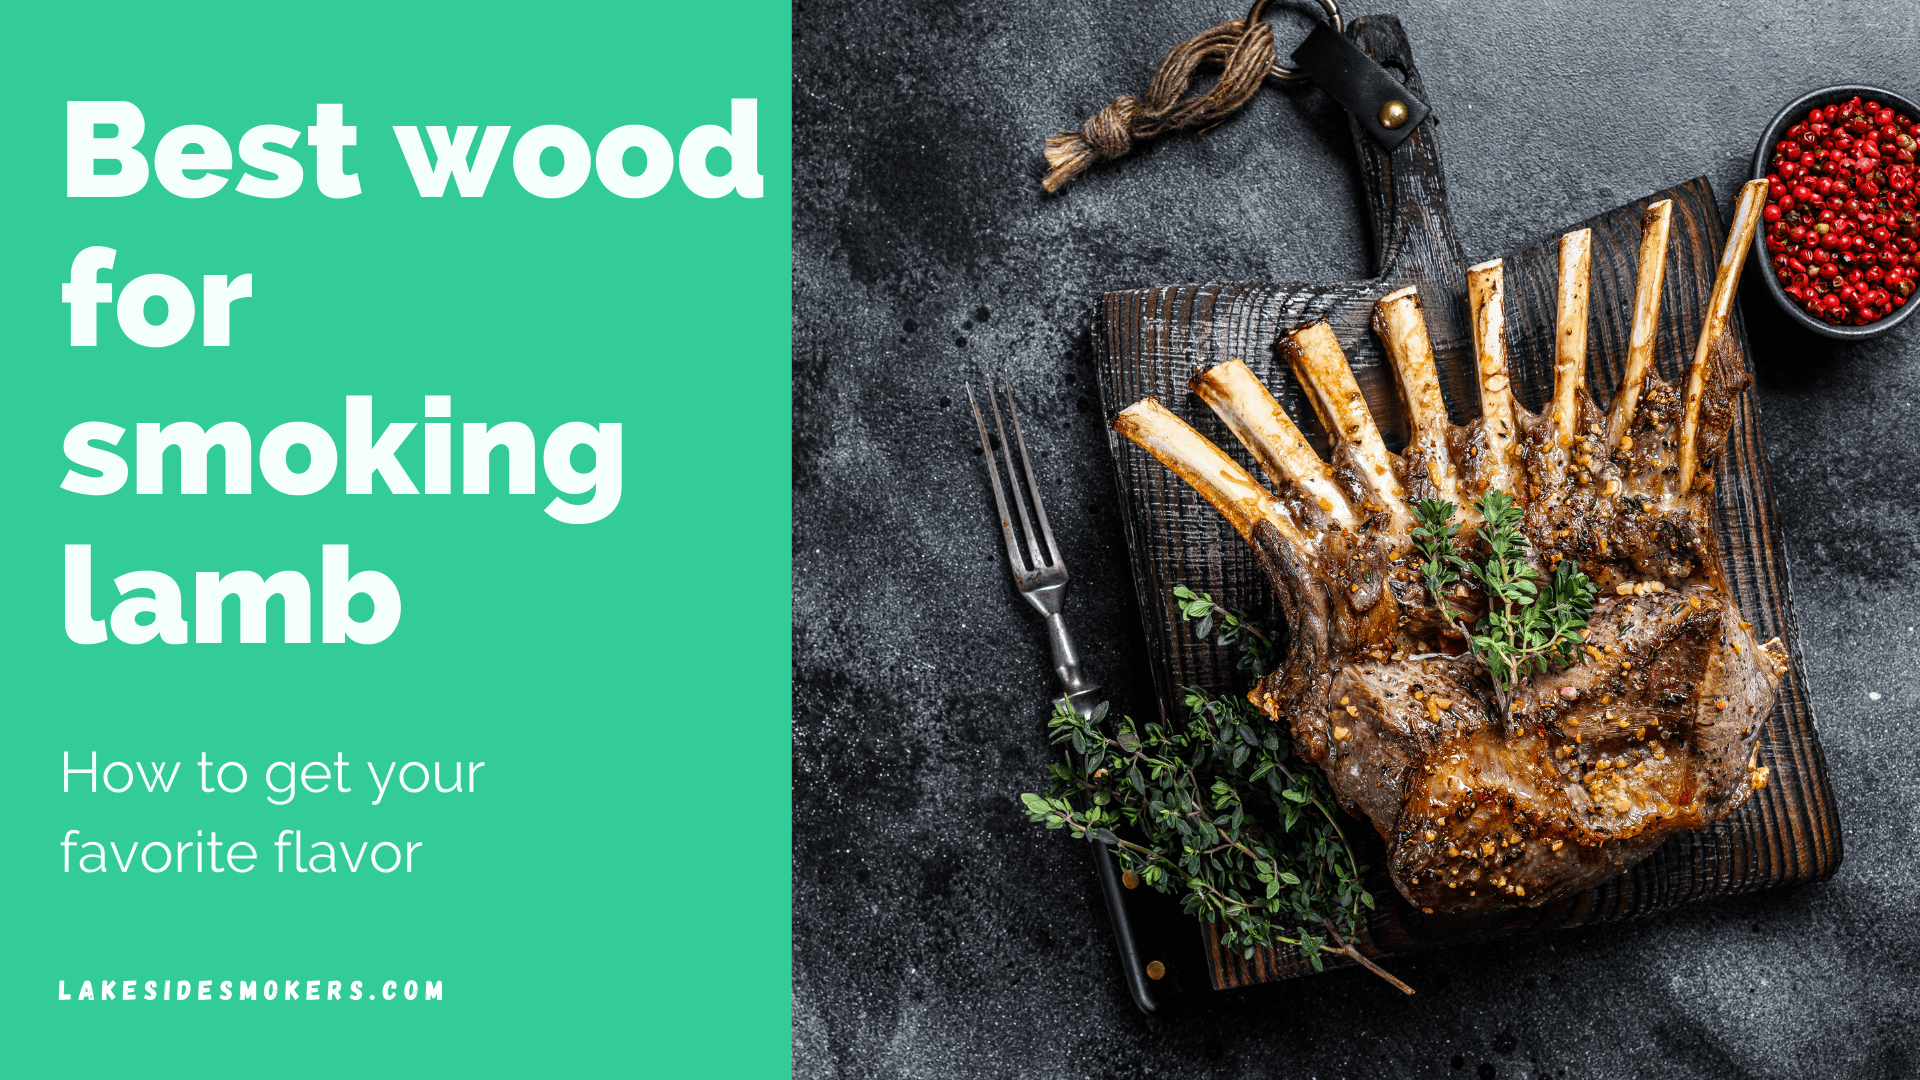 Best wood for smoking lamb | How to get your favorite flavor